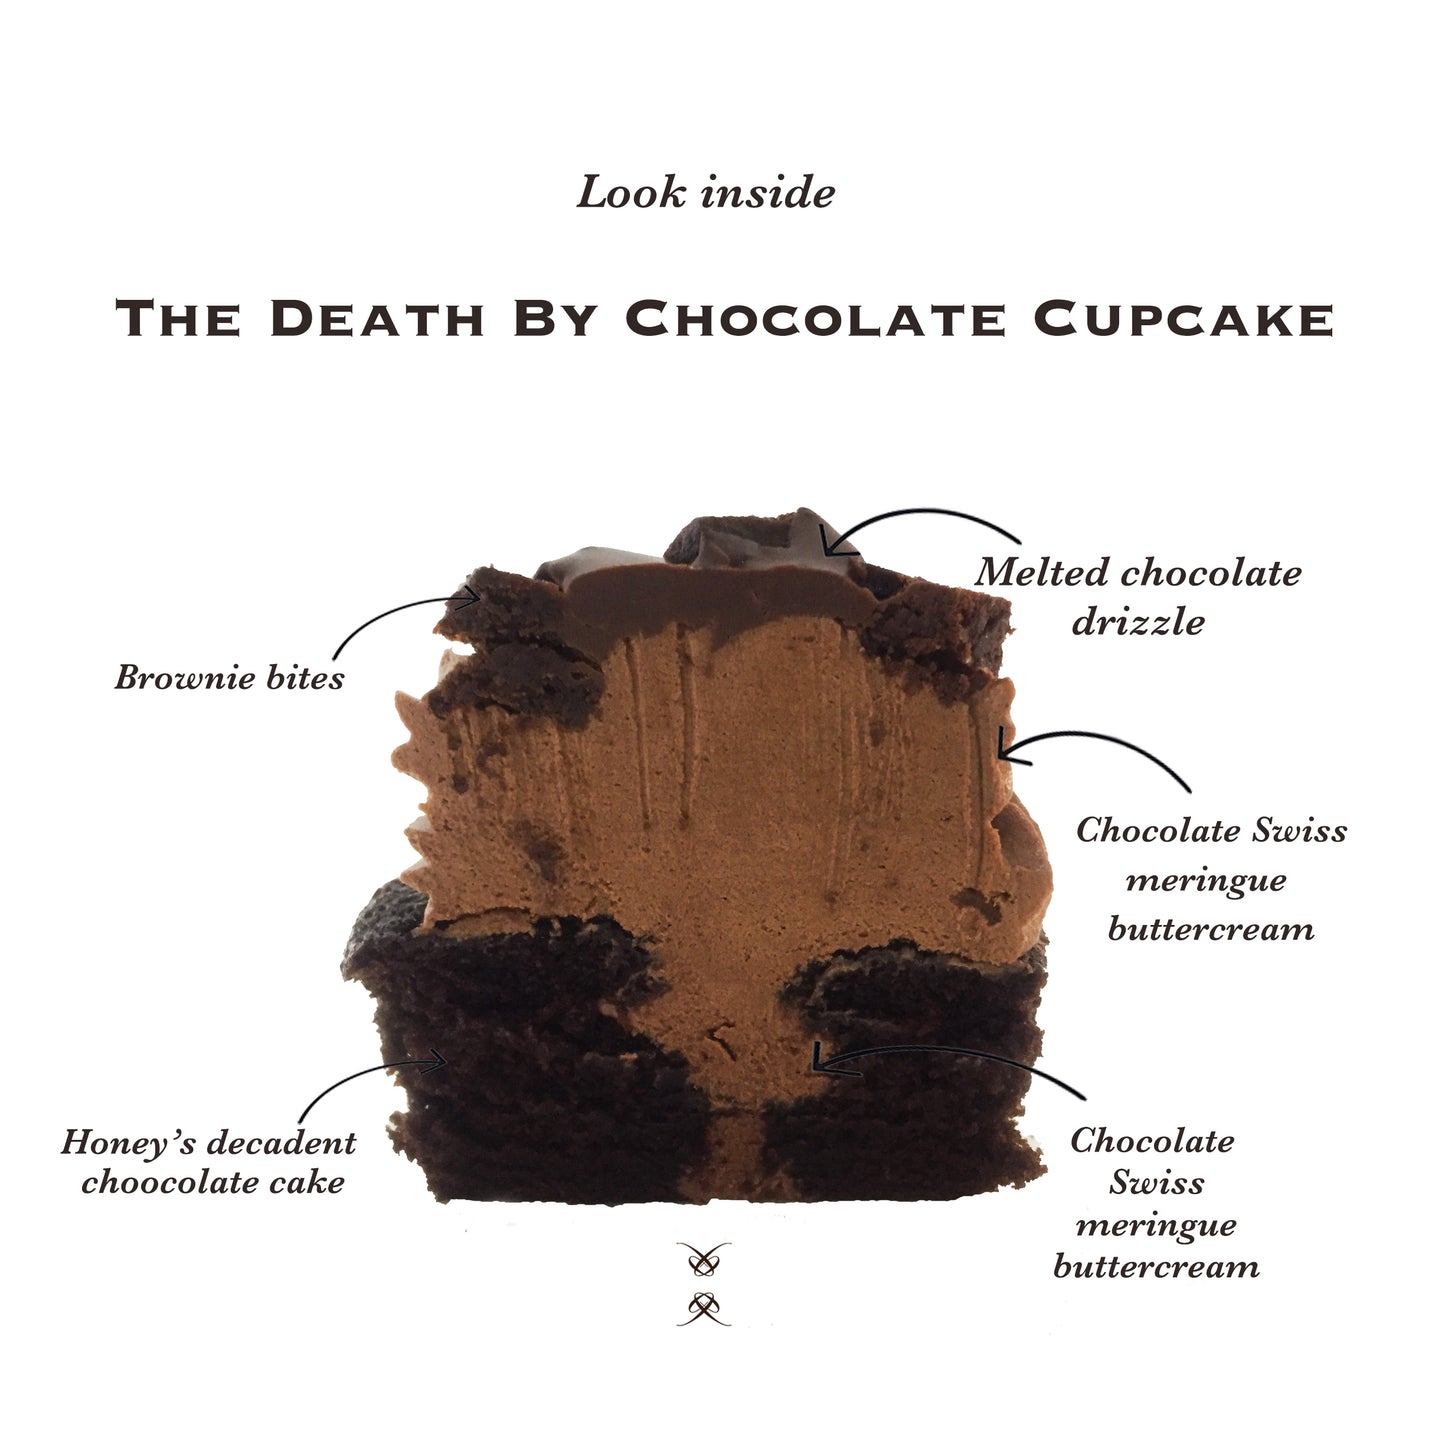 The Death By Chocolate